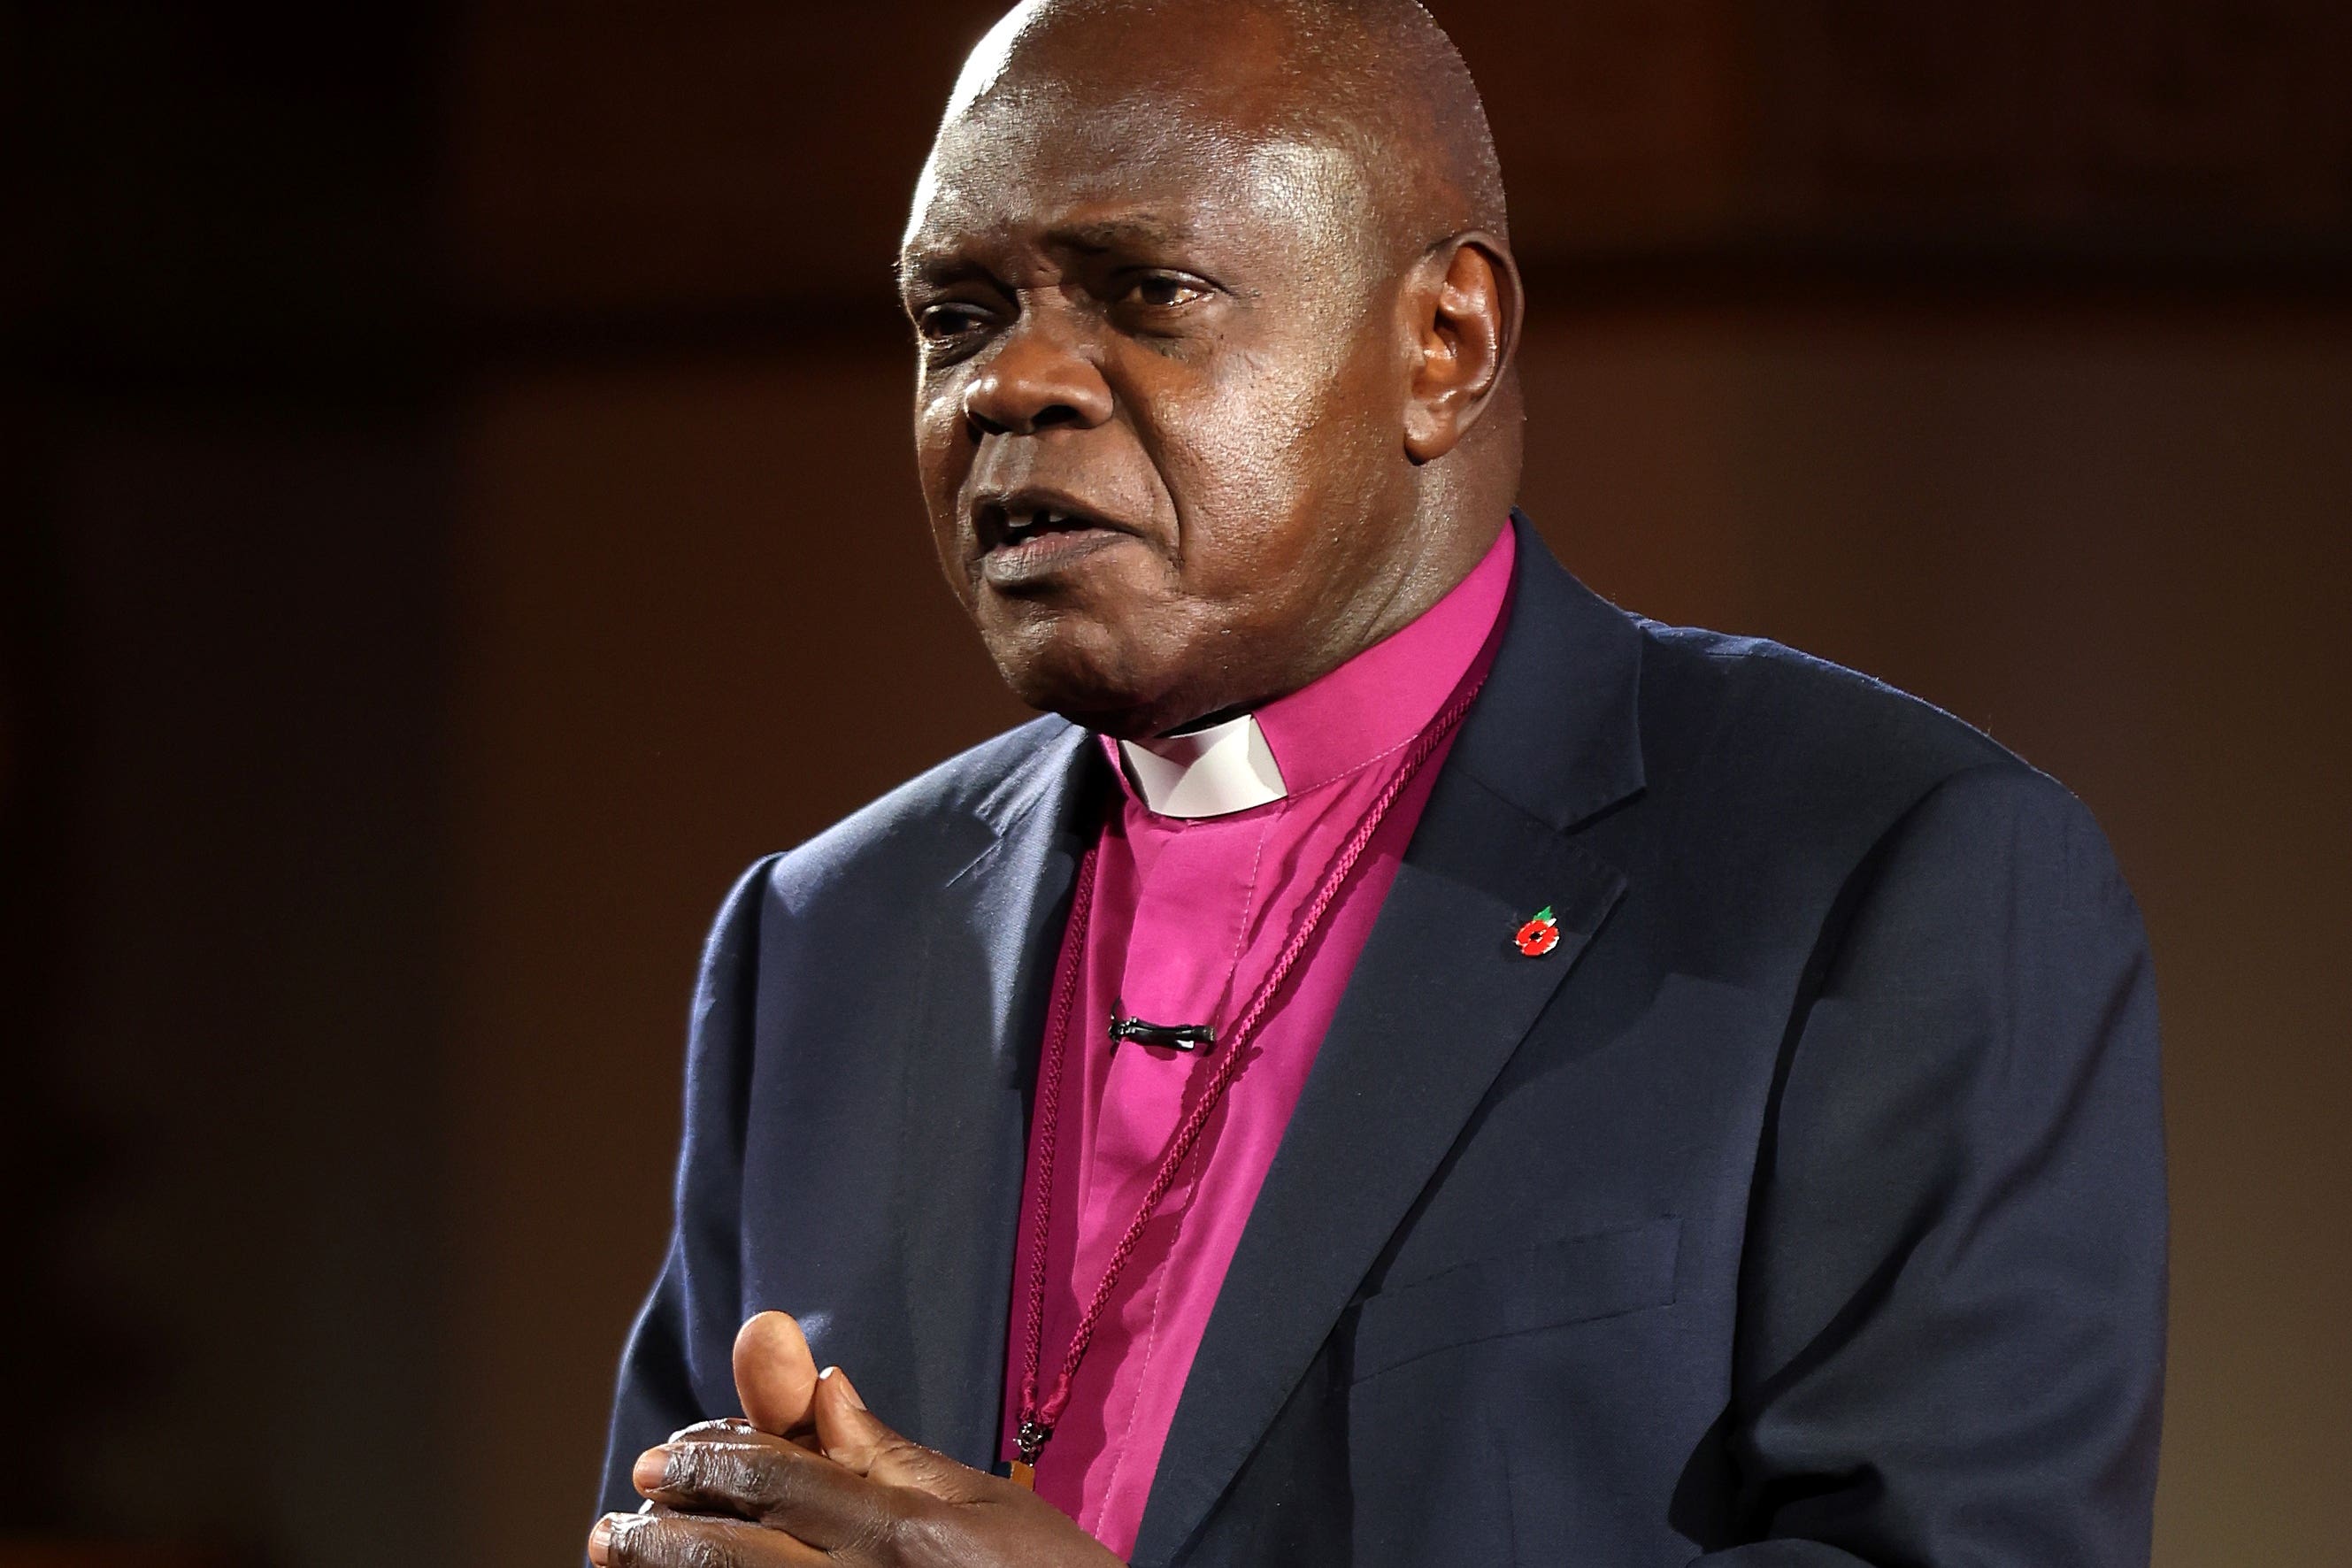 Lord Sentamu has stood back from his role as an honorary assistant bishop in the diocese of Newcastle “until both the findings and his response can be explored further”.